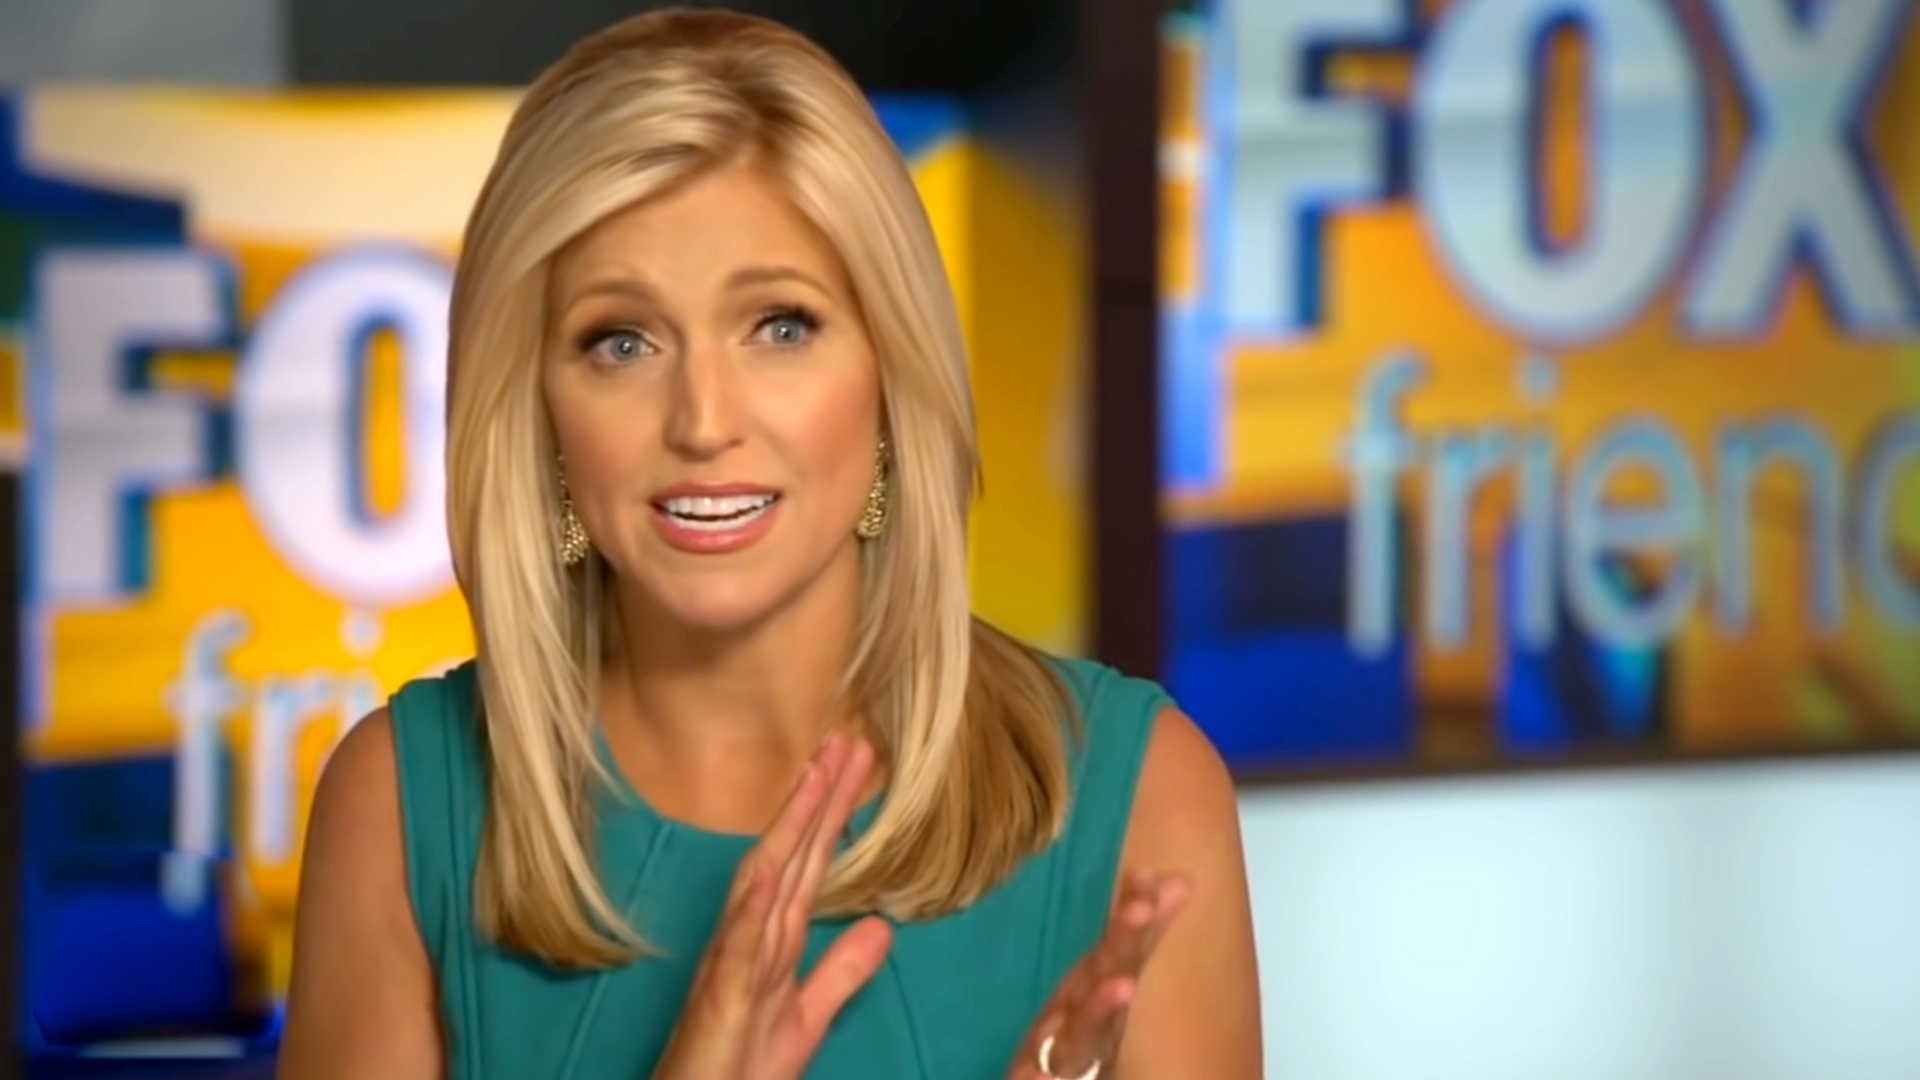 Ainsley Earhardt wearin a green grown during a presentation on Fox News Channel